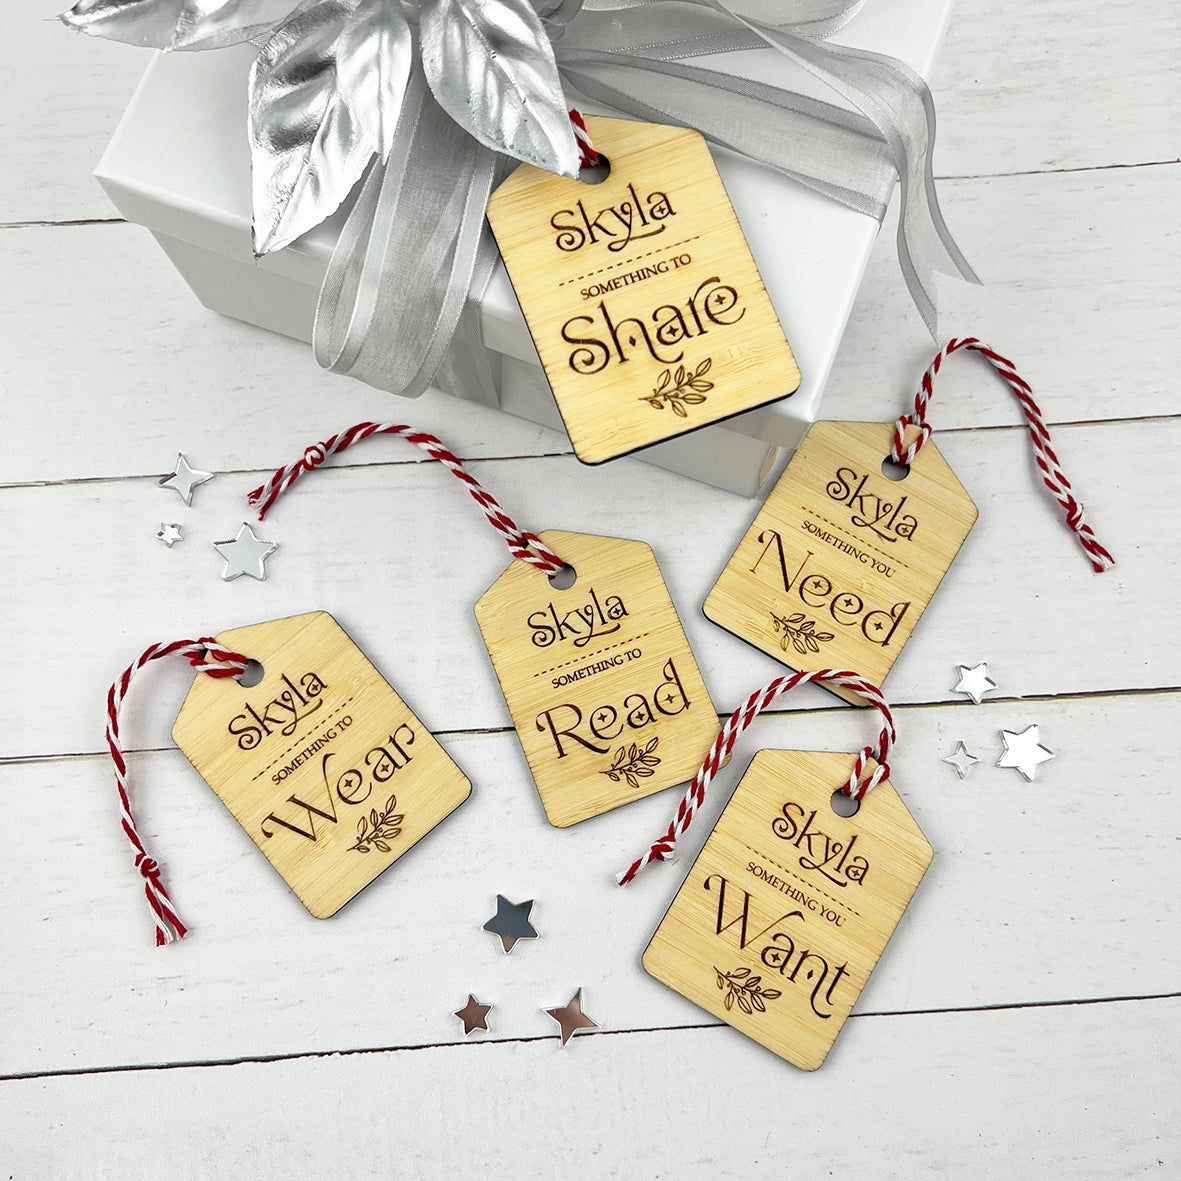 Personalised Foliage Mindful Gifting Tags - Set of 5 Tags